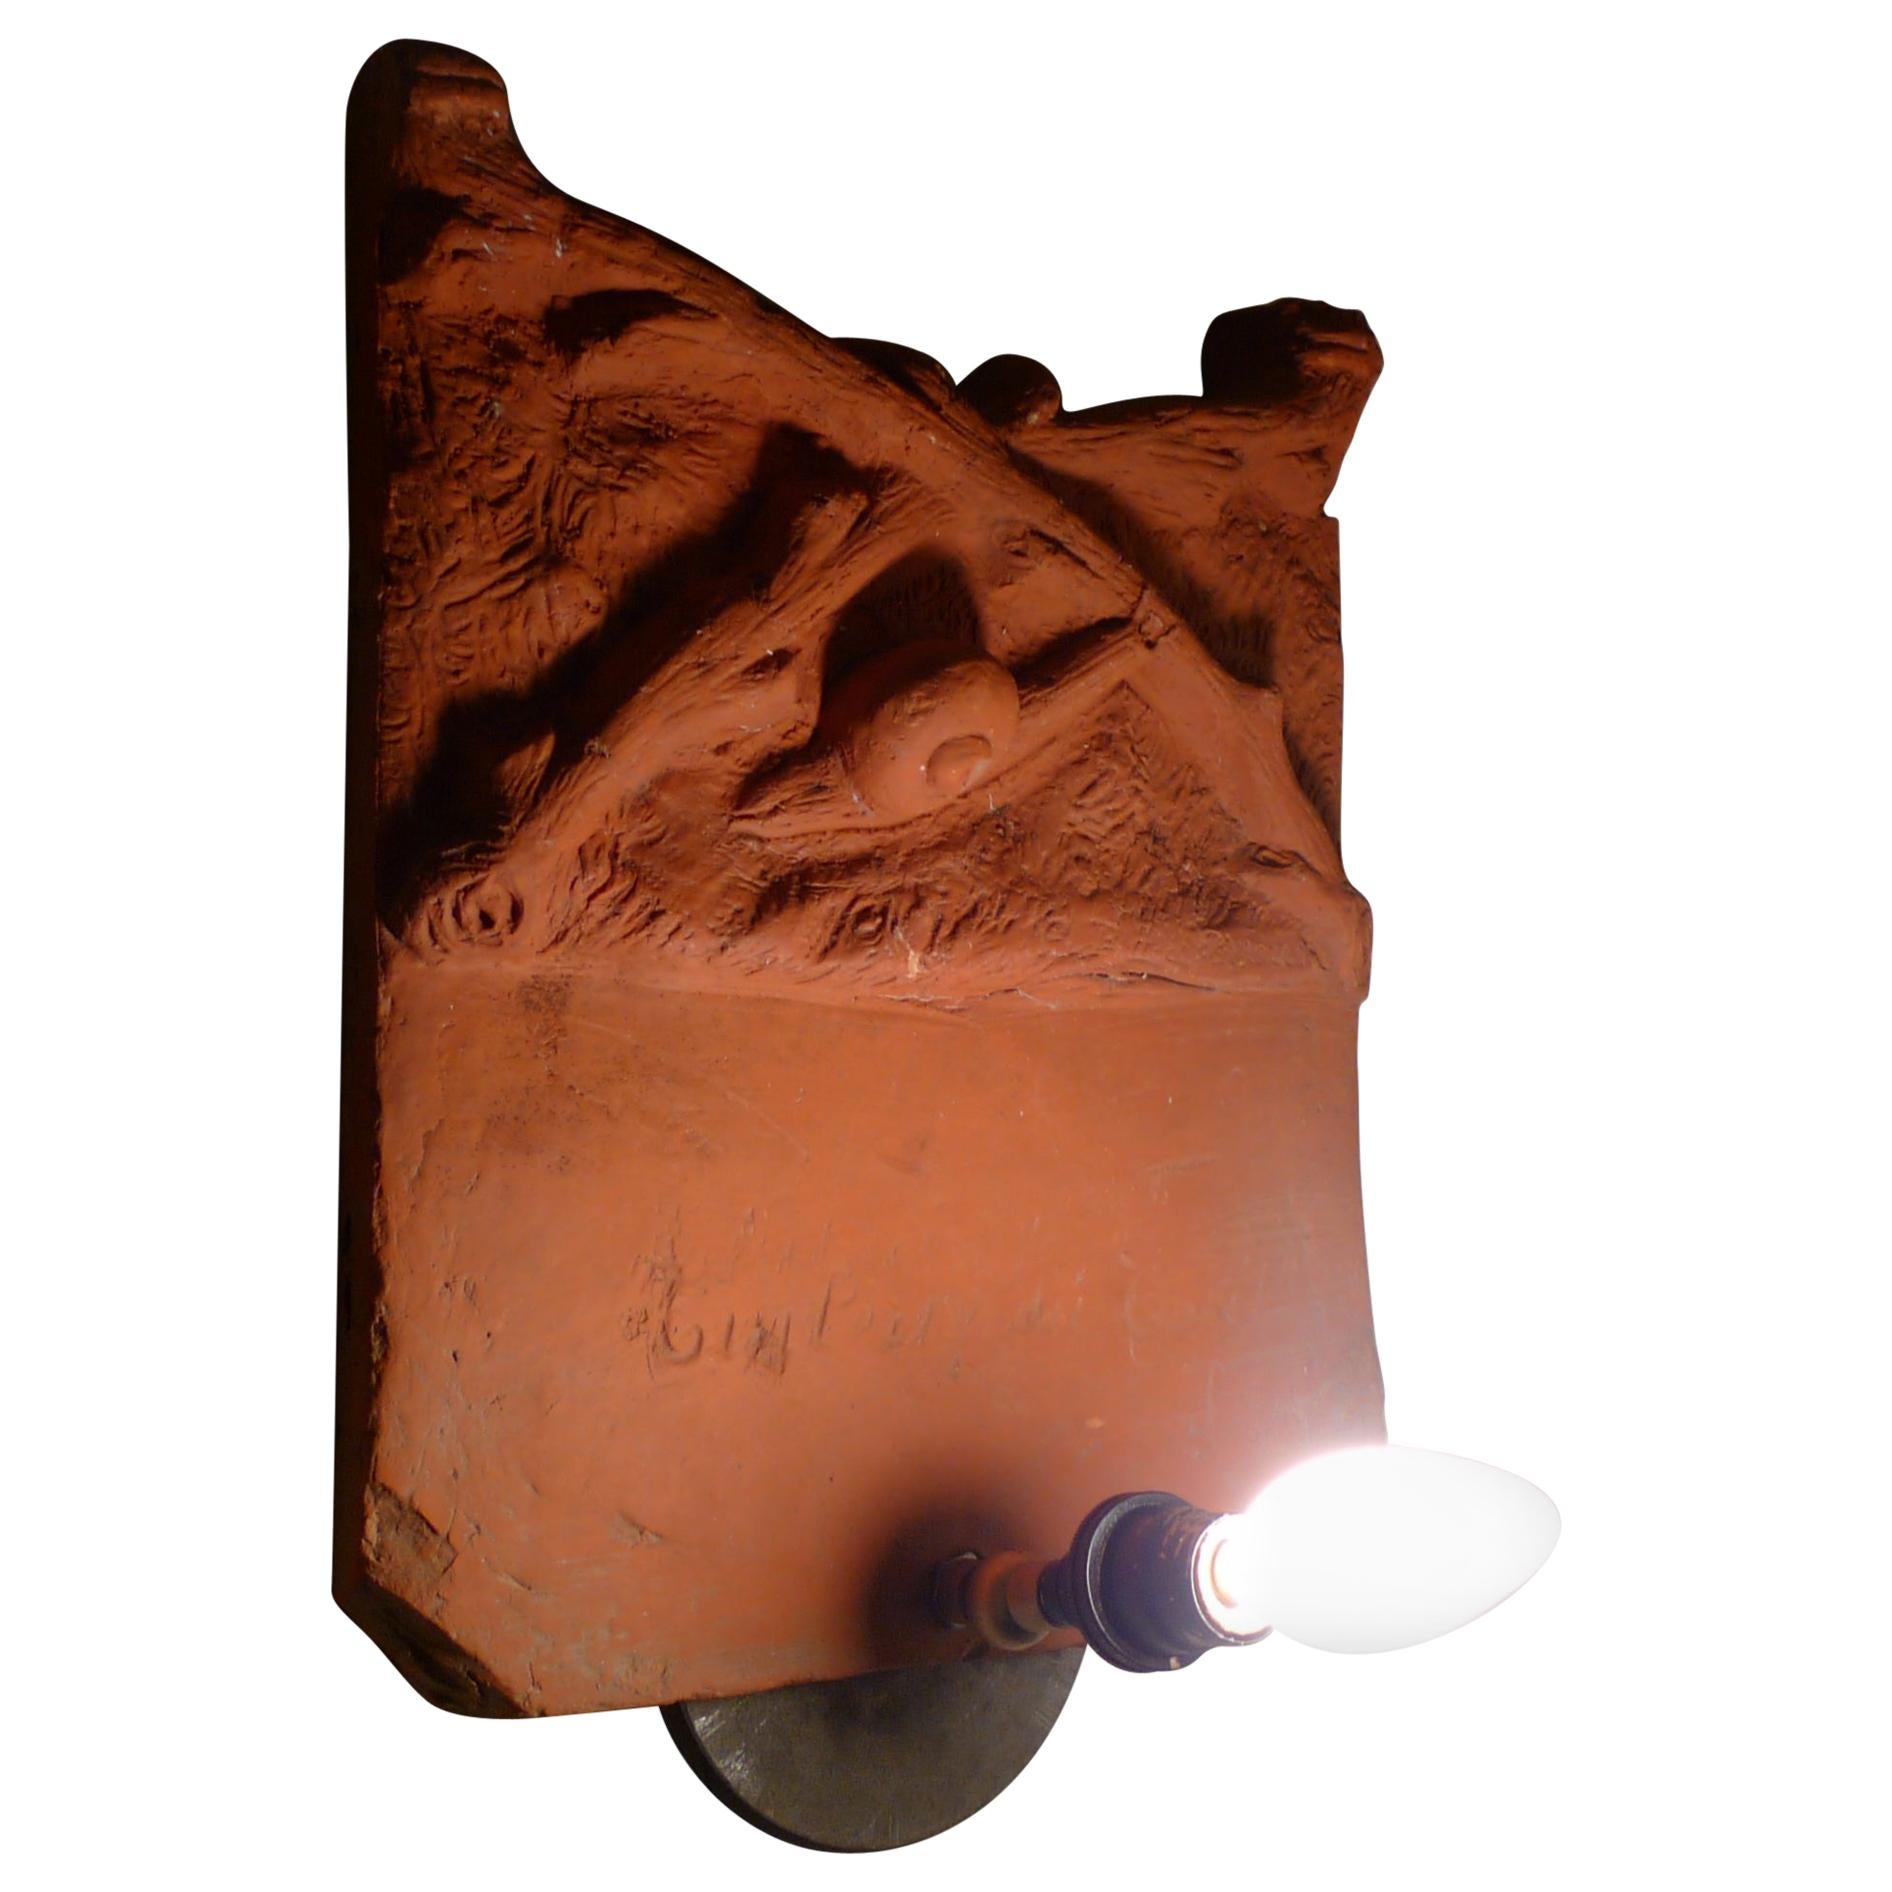 Sconce Light from French Terracotta Garden Stone Signed by Artist, circa 1700s For Sale